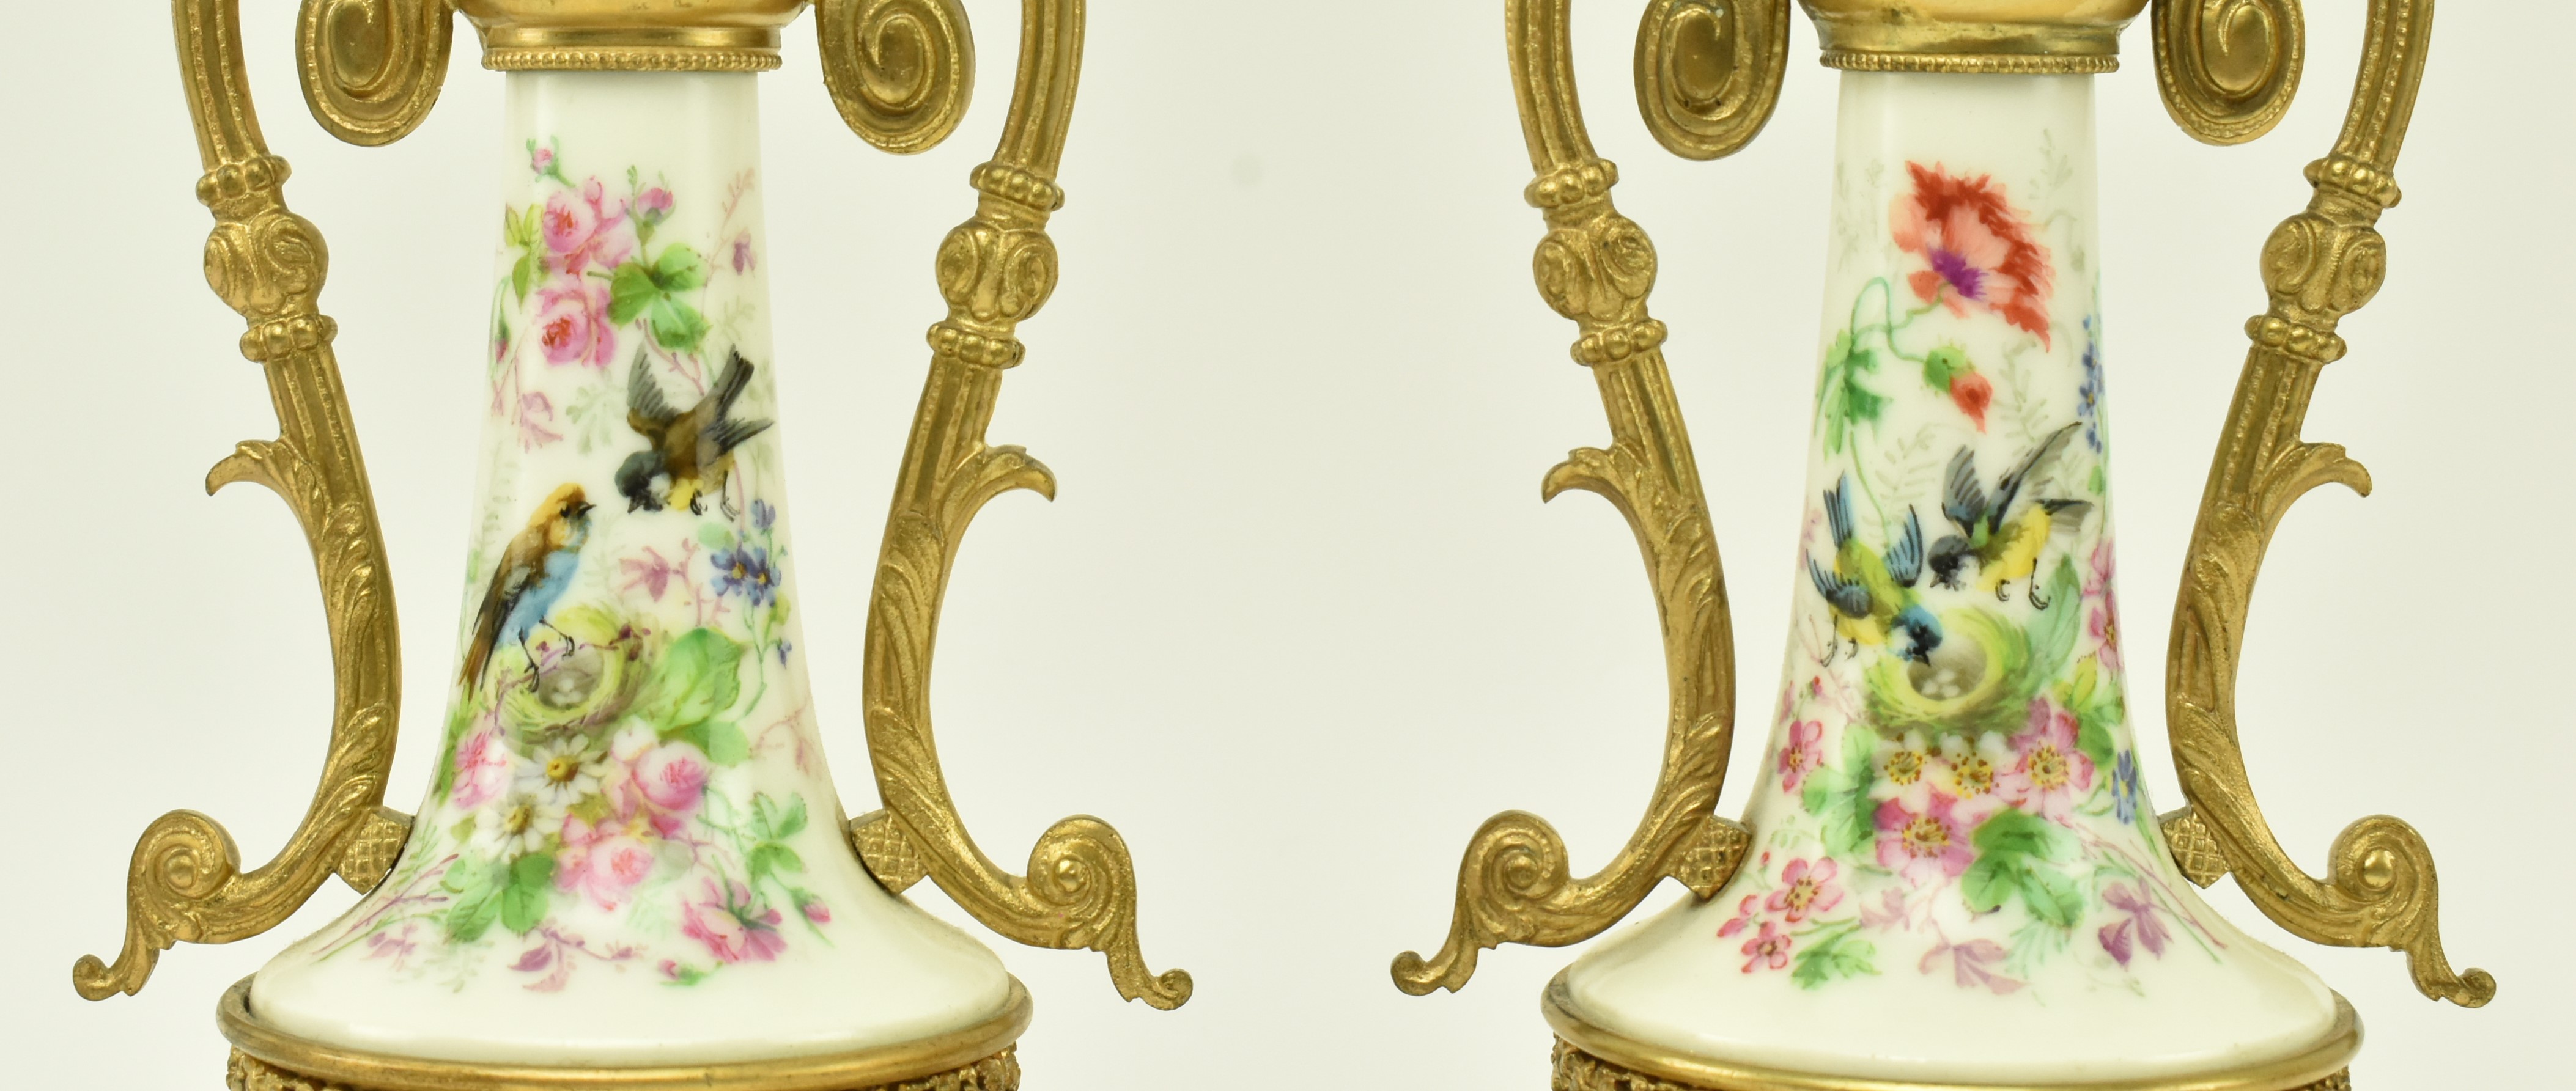 FRENCH 19TH CENTURY PORCELAIN & GILT BRONZE MANTLE URNS - Image 5 of 7